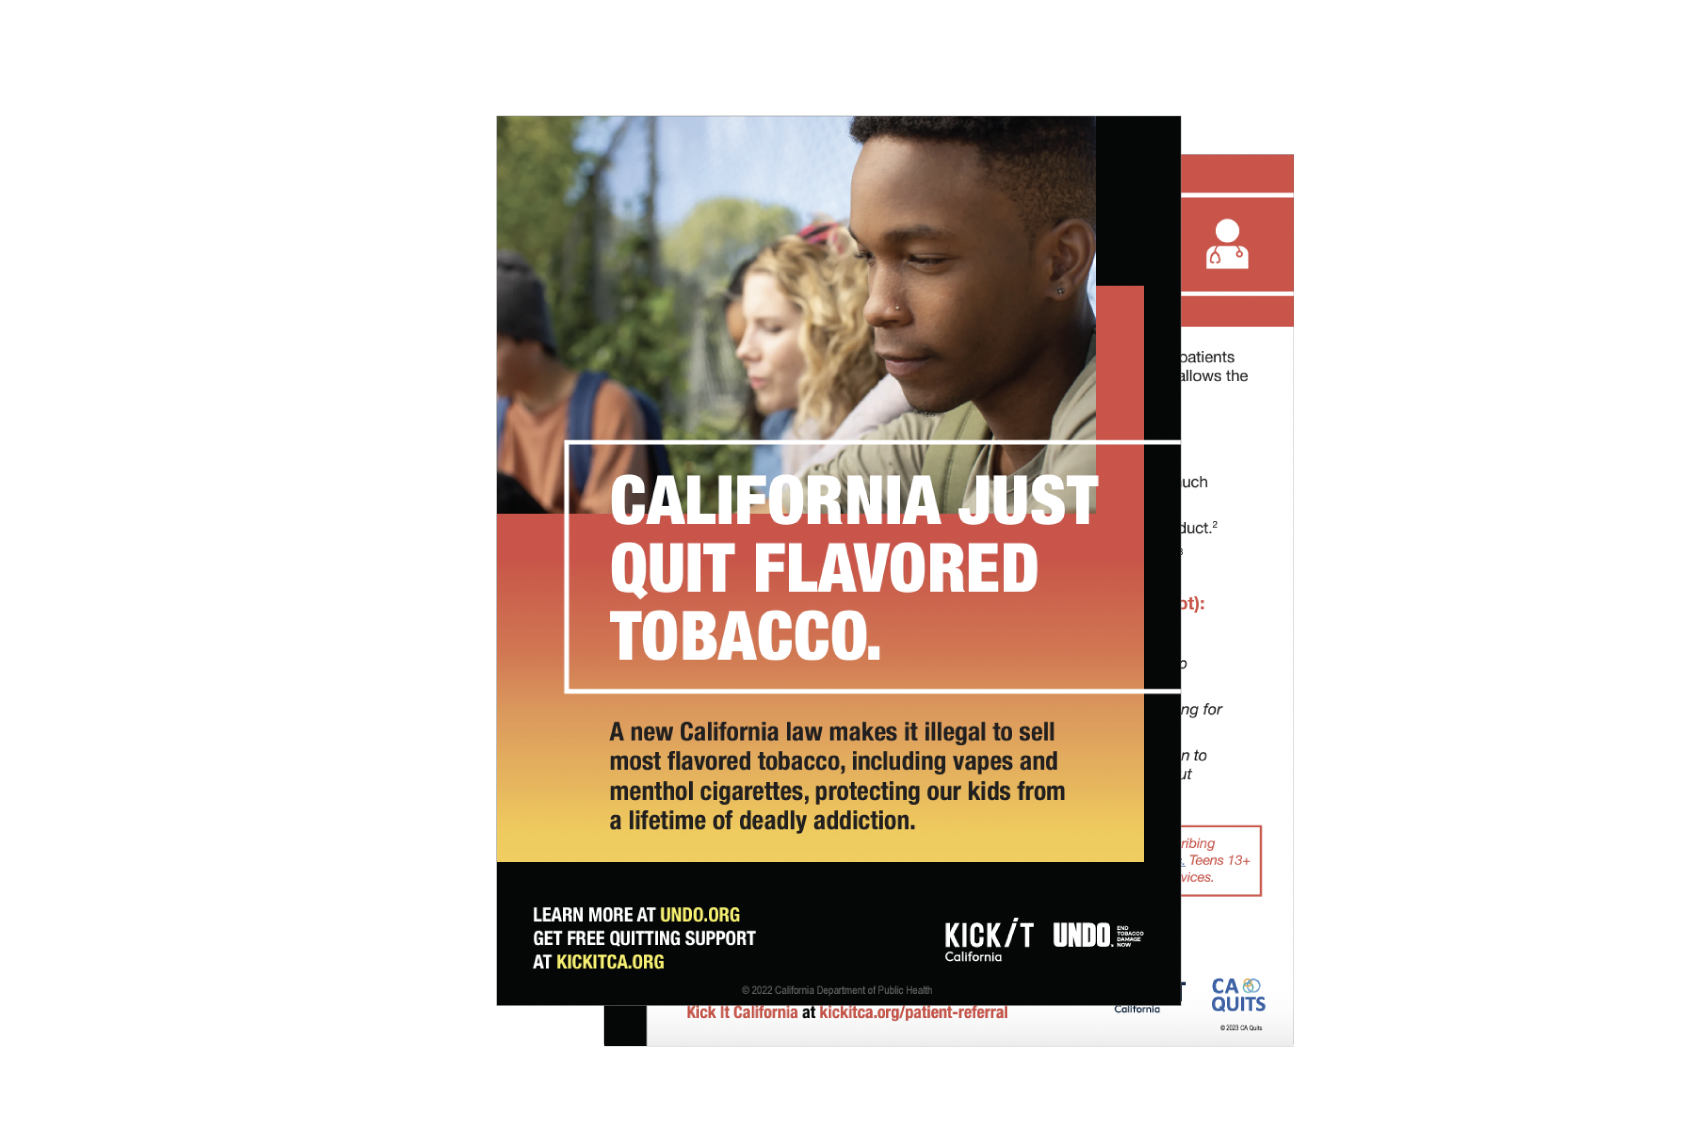 An image of the front page of the tobacco flavor ban flyer.